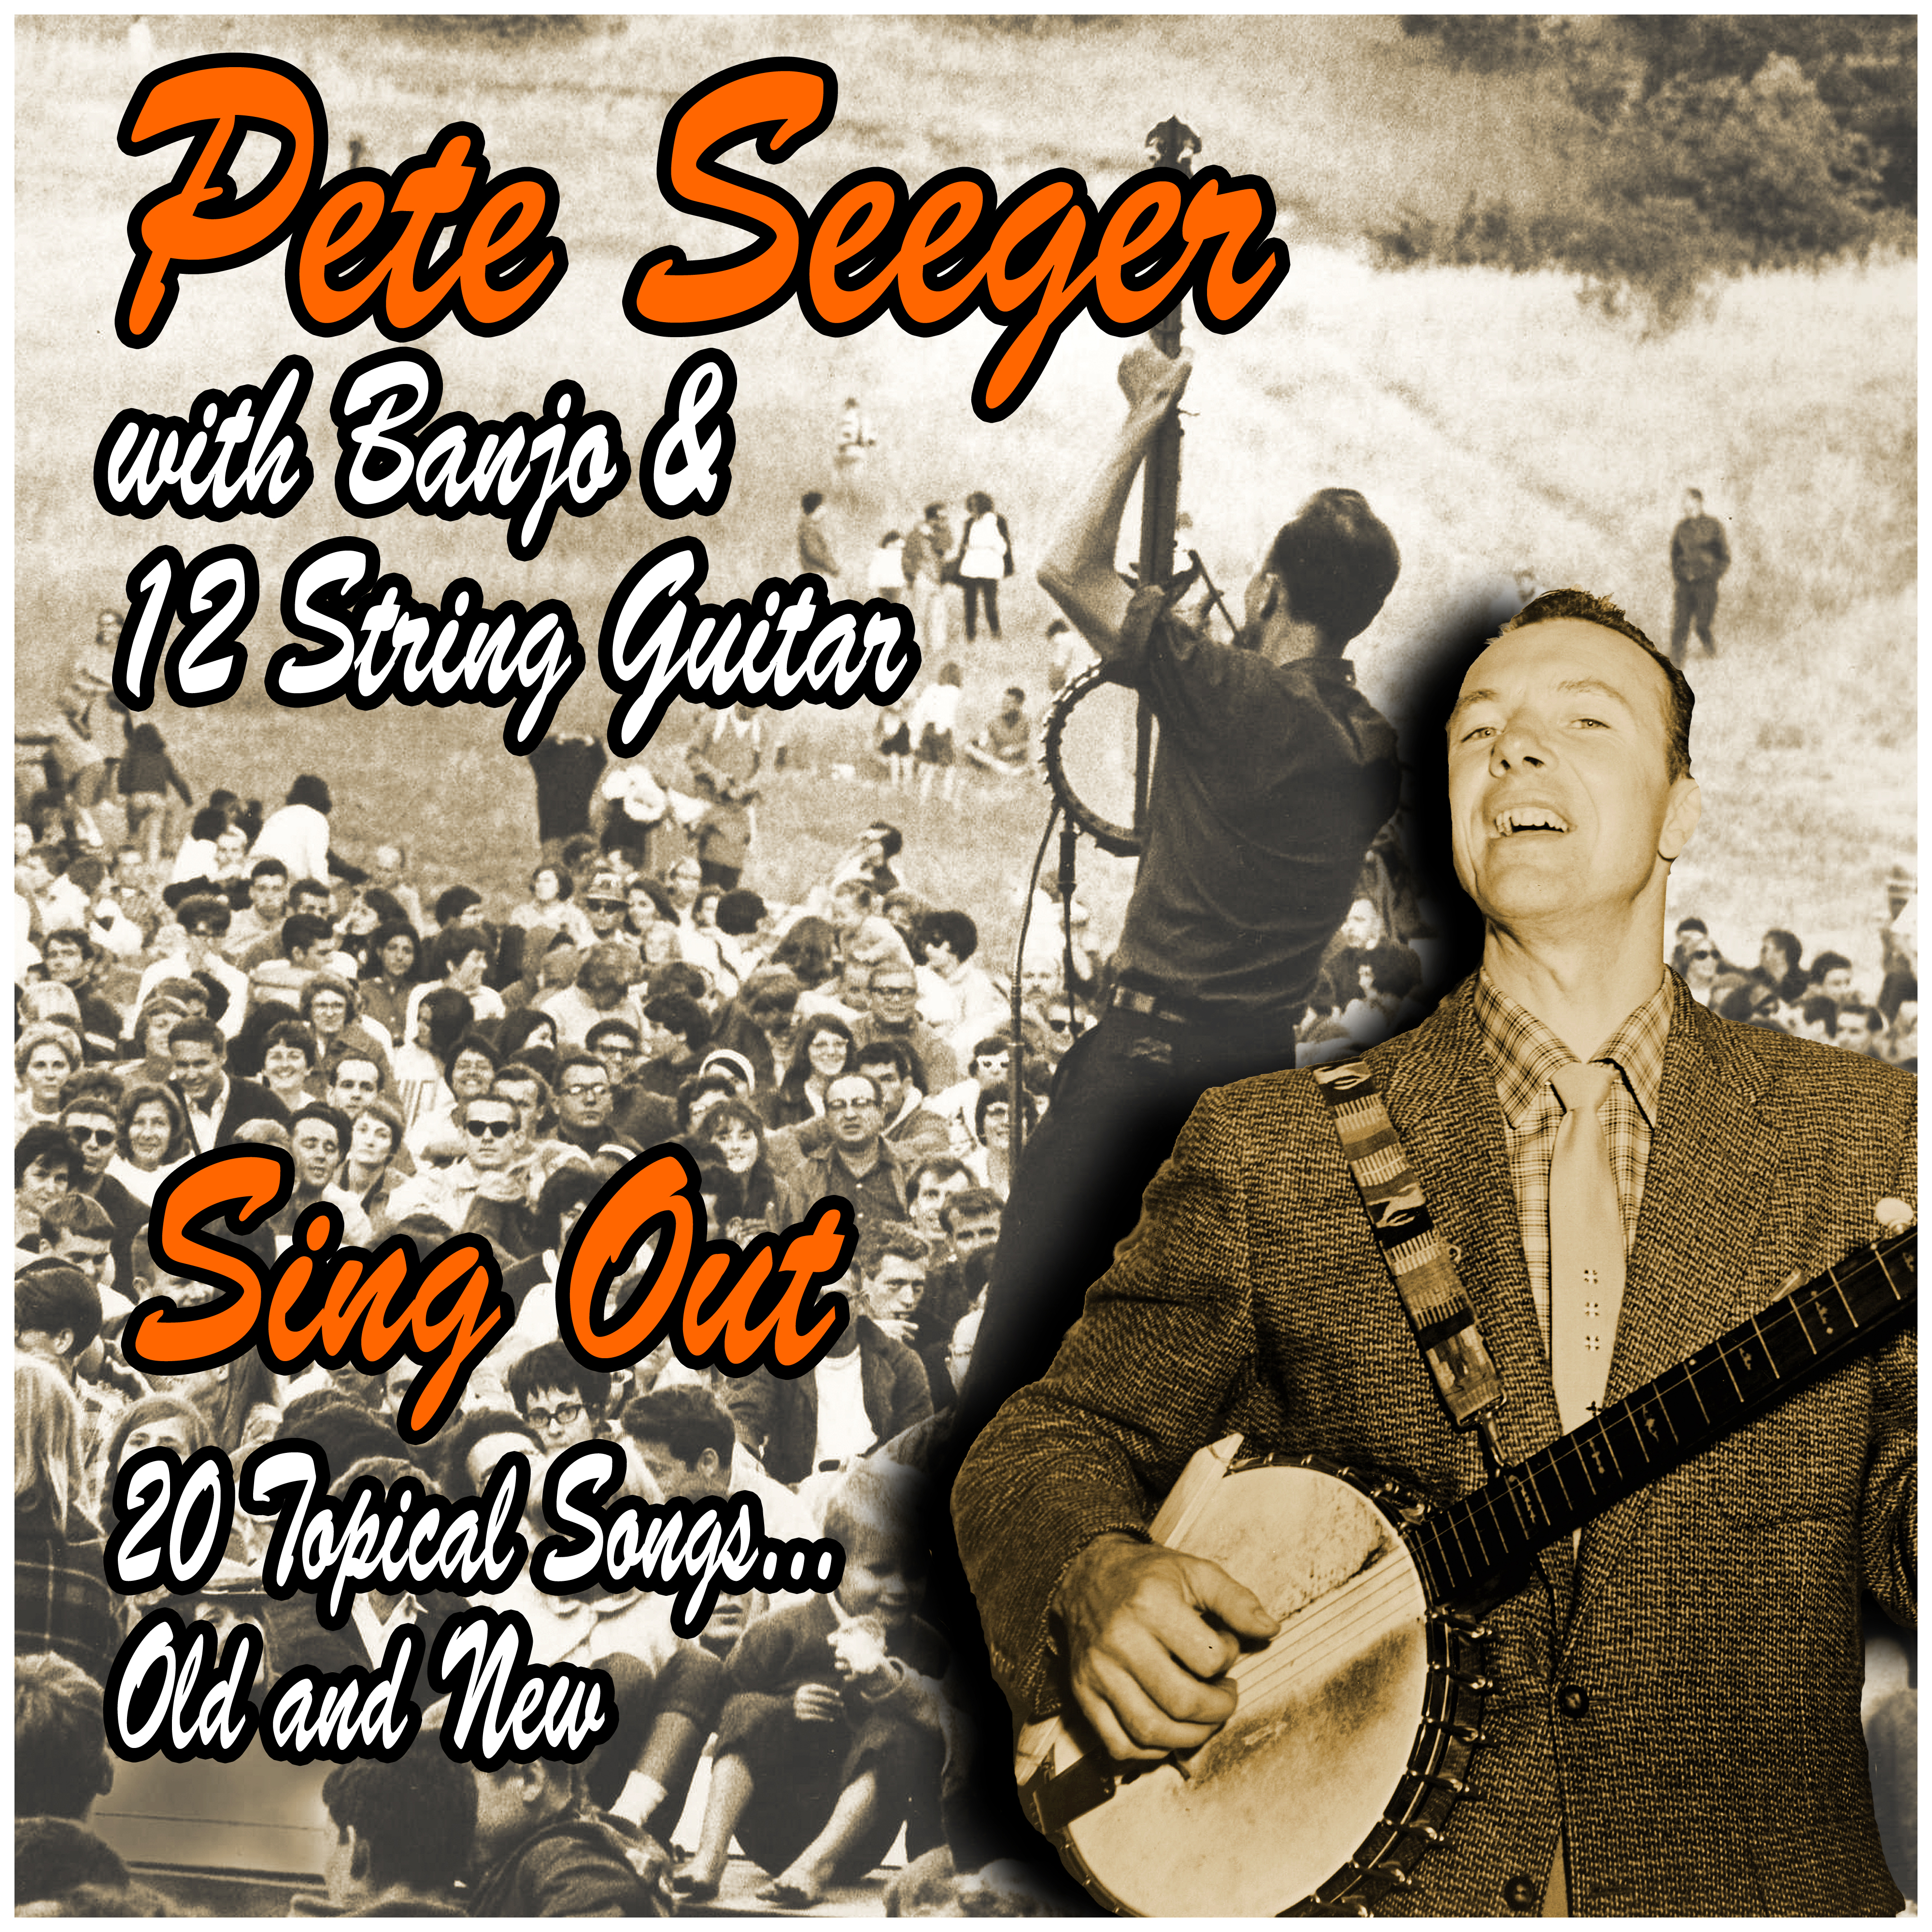 Sing Out : 20 Topical Songs, Old and New : Pete Seeger with Banjo and 12 String Guitar